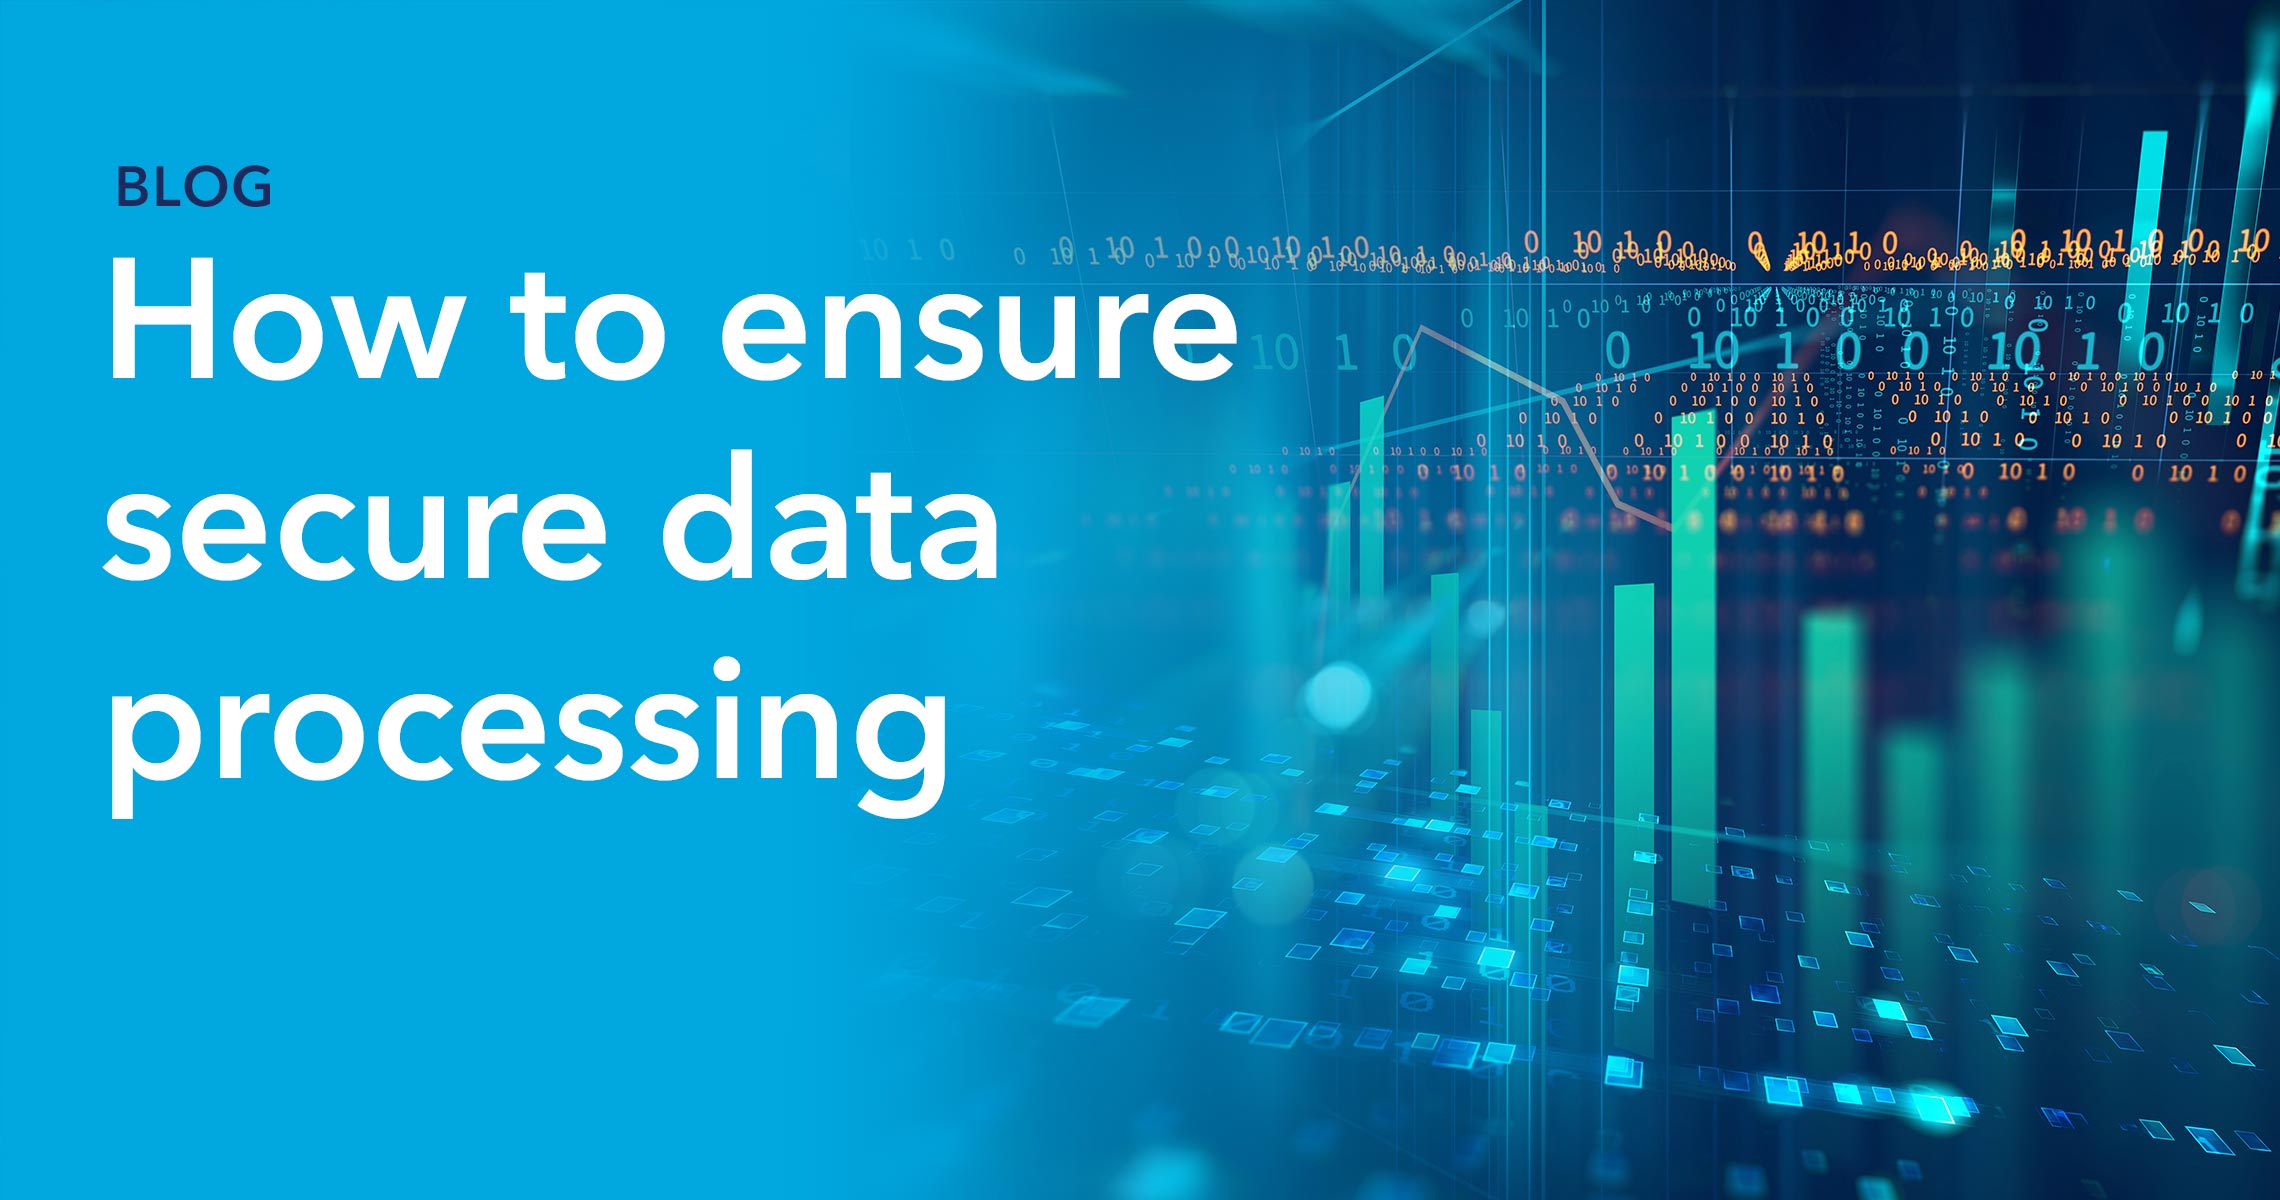 Blog header - How to ensure secure data processing